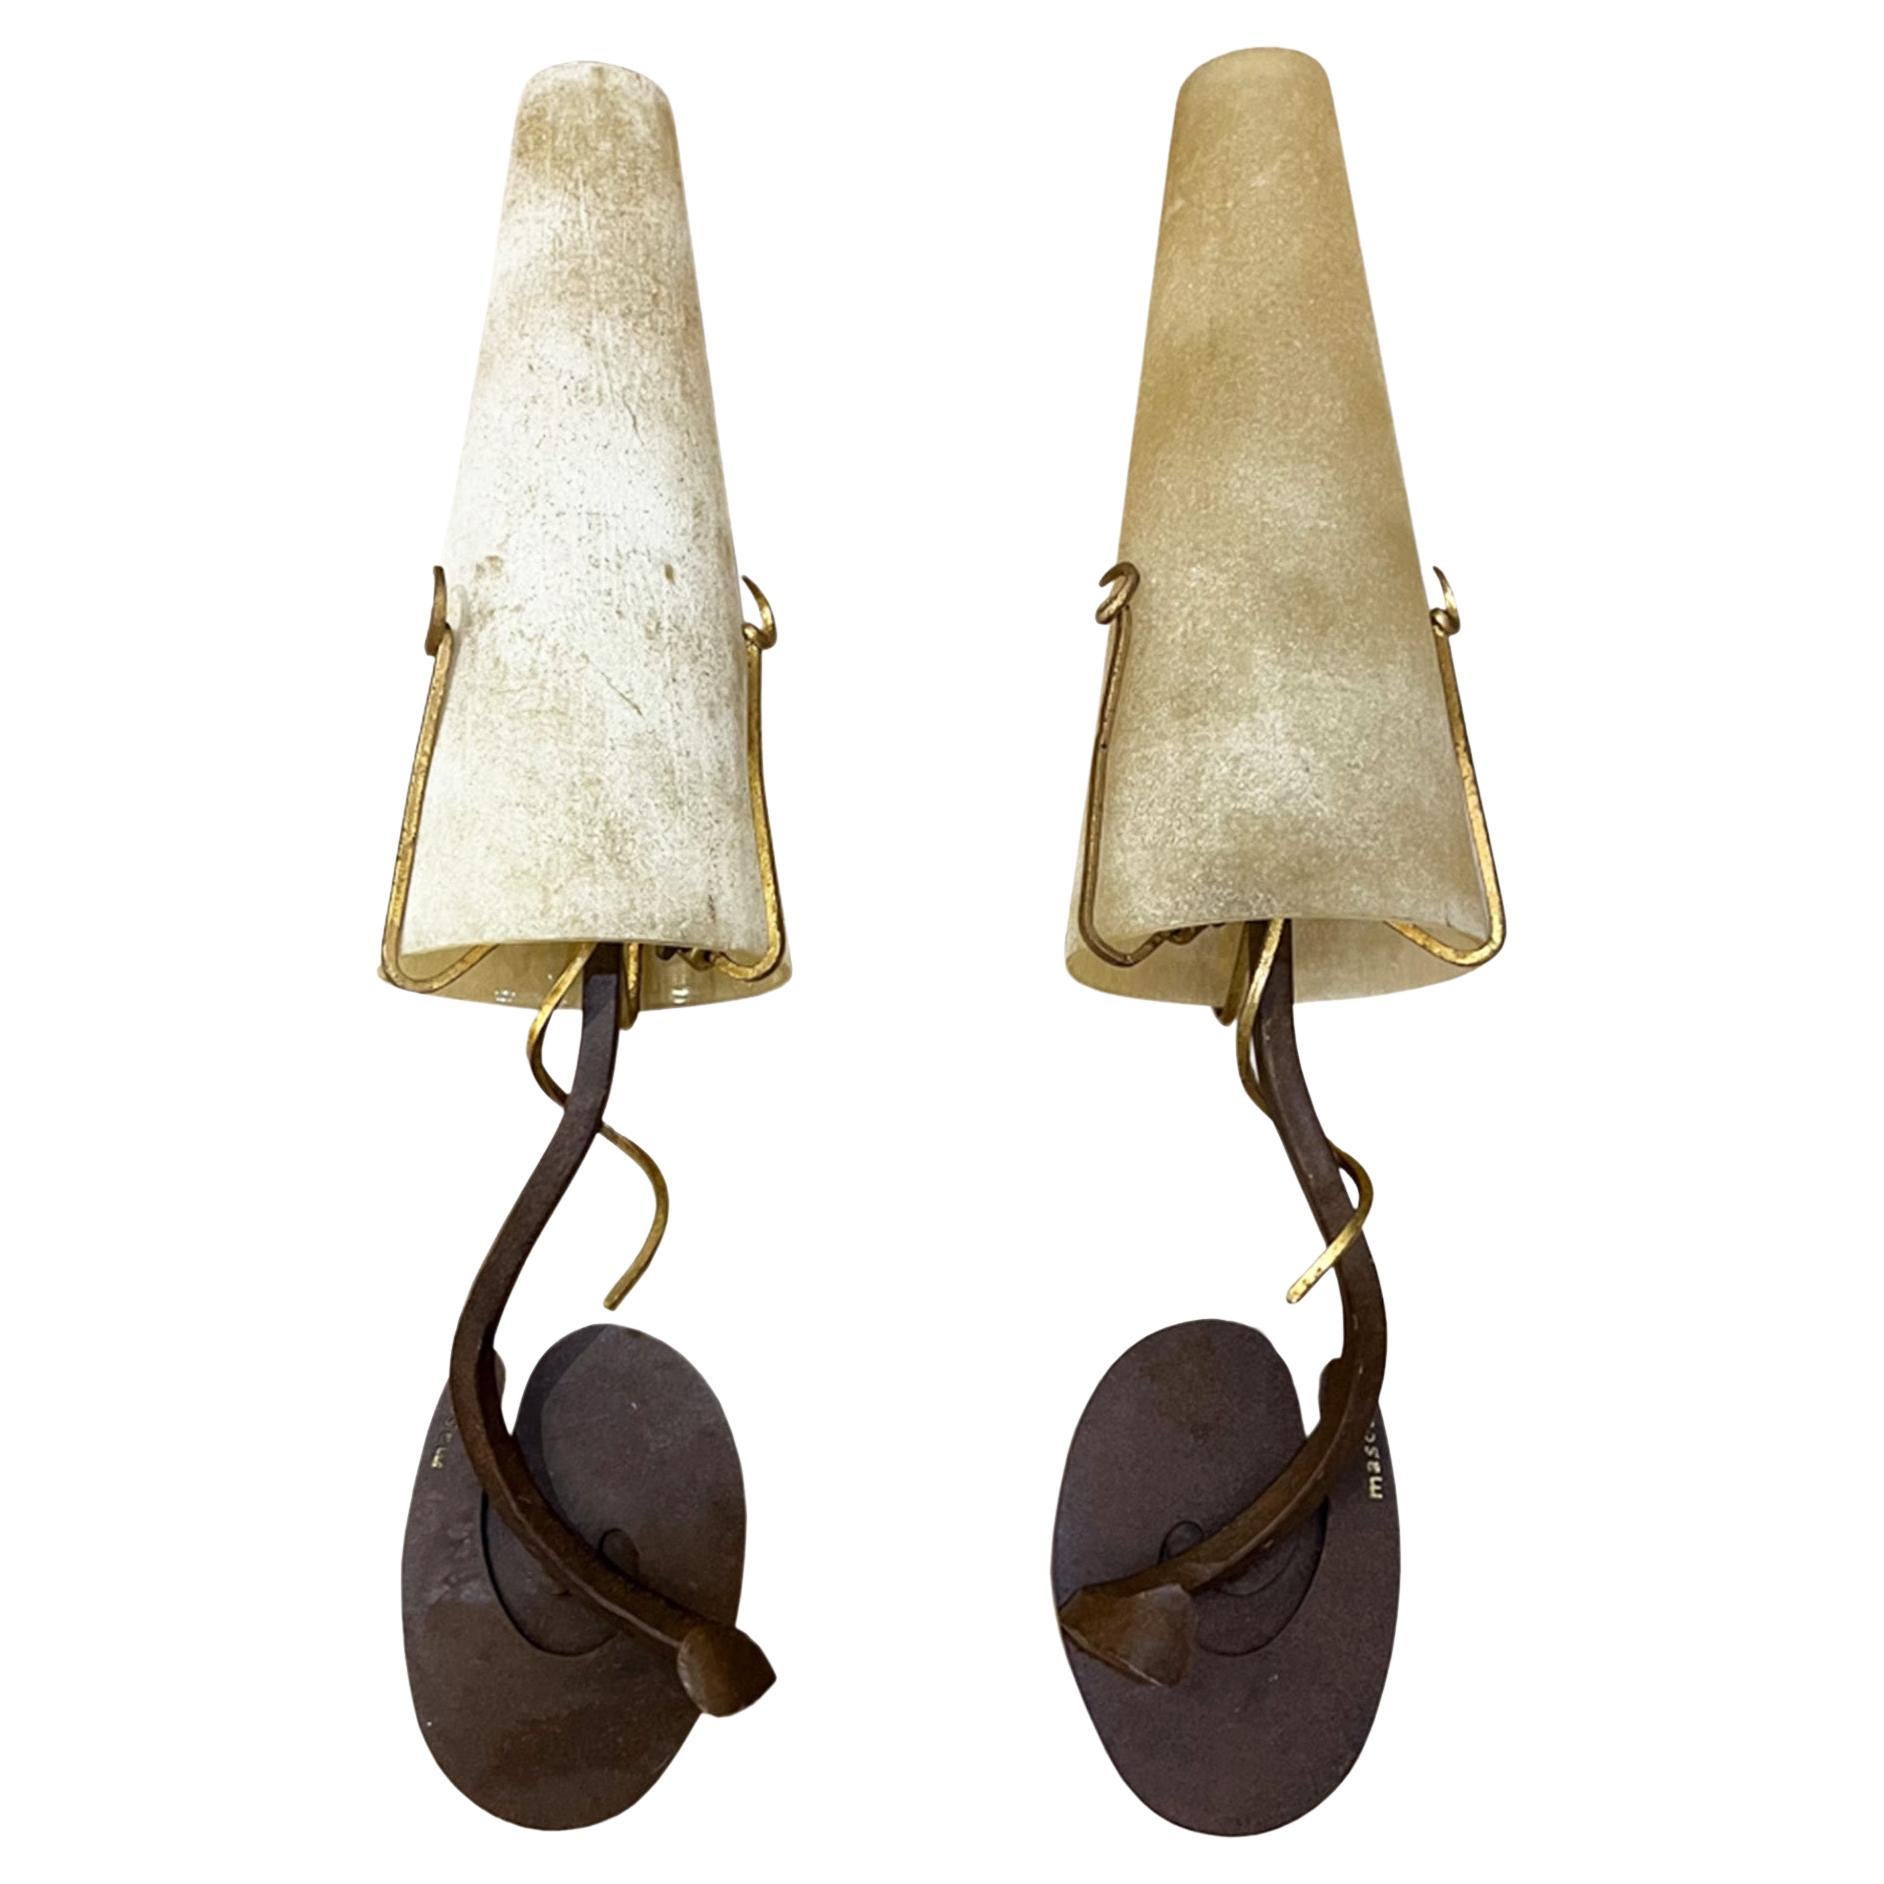 Pair of Masca Torch Wall Sconces